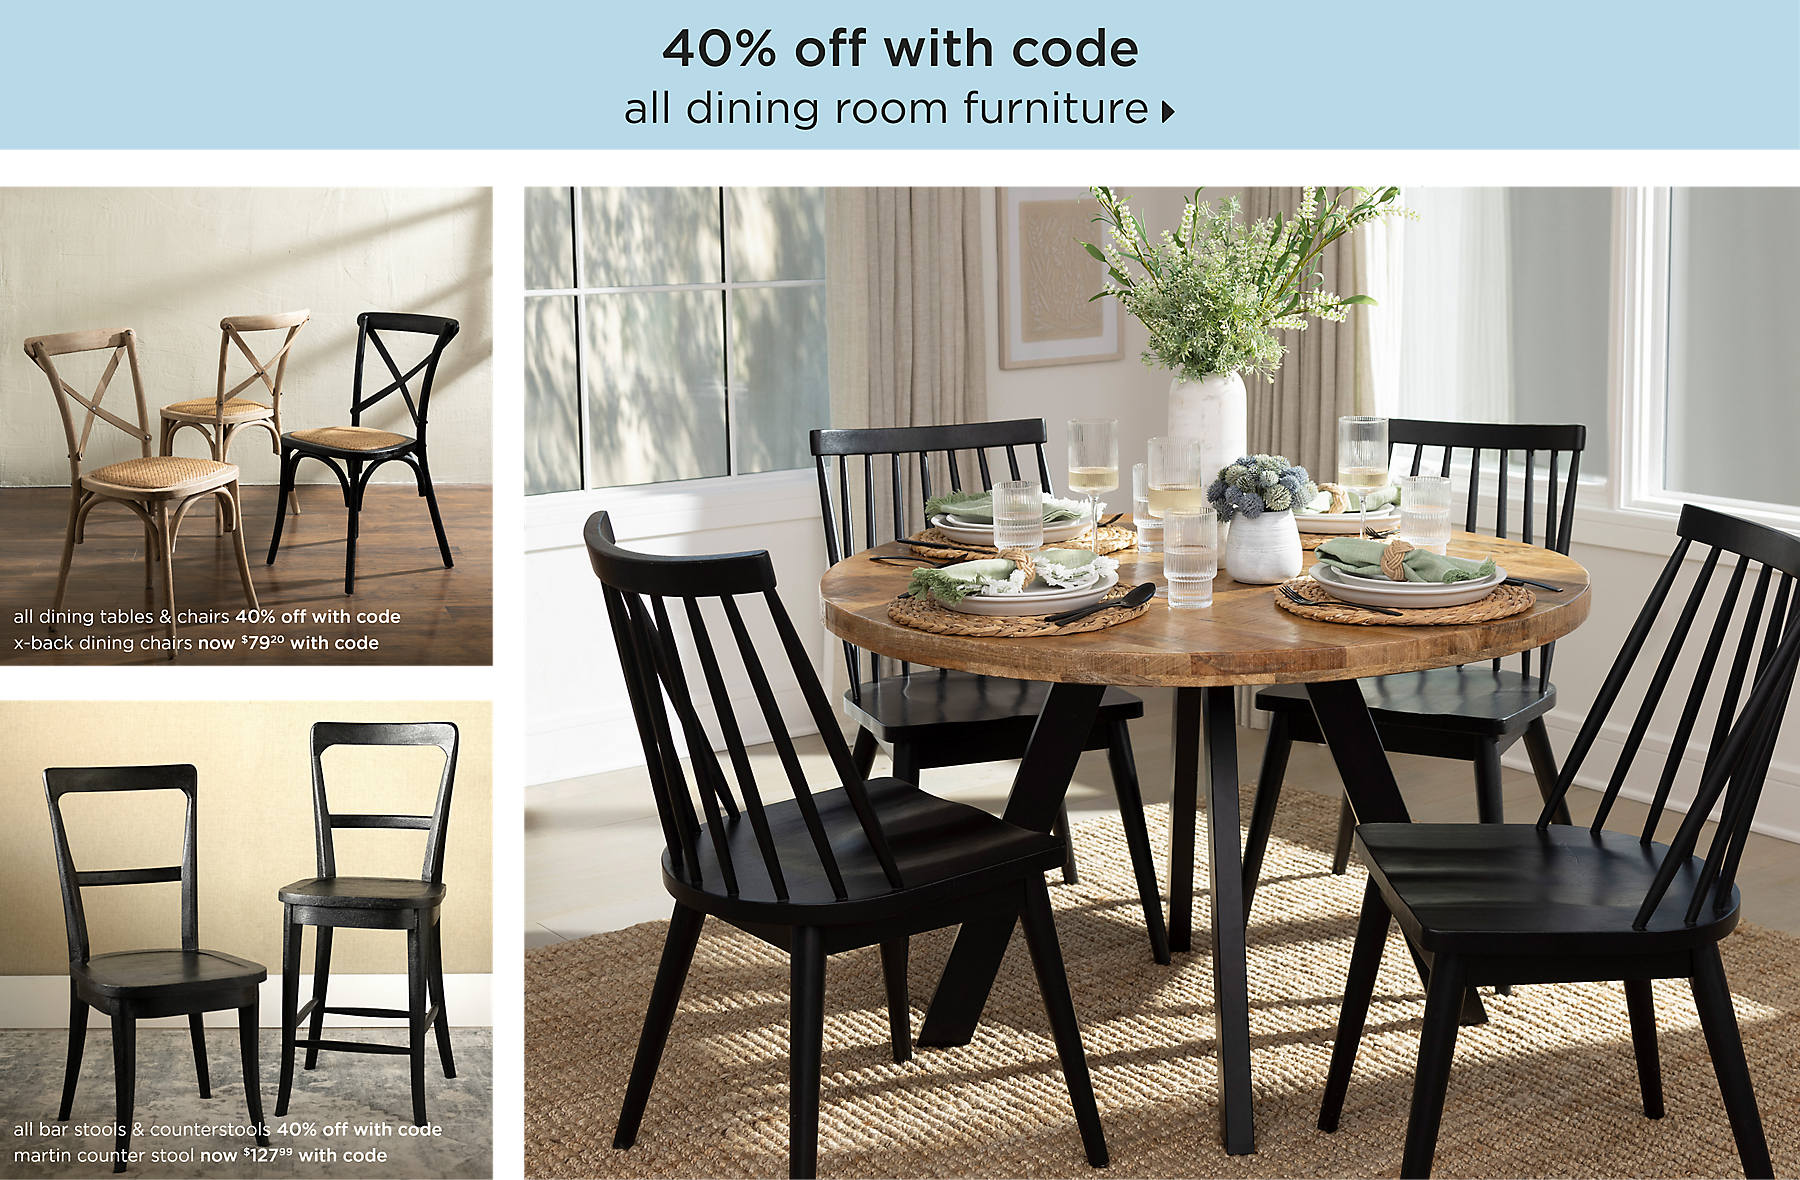 all dining room furniture 40% off with code shop now all dining tables 40% off with code x-back dining chairs now $79.20 with code all bar stools & counterstools 40% off with code martin counter stool now $127.99 with code